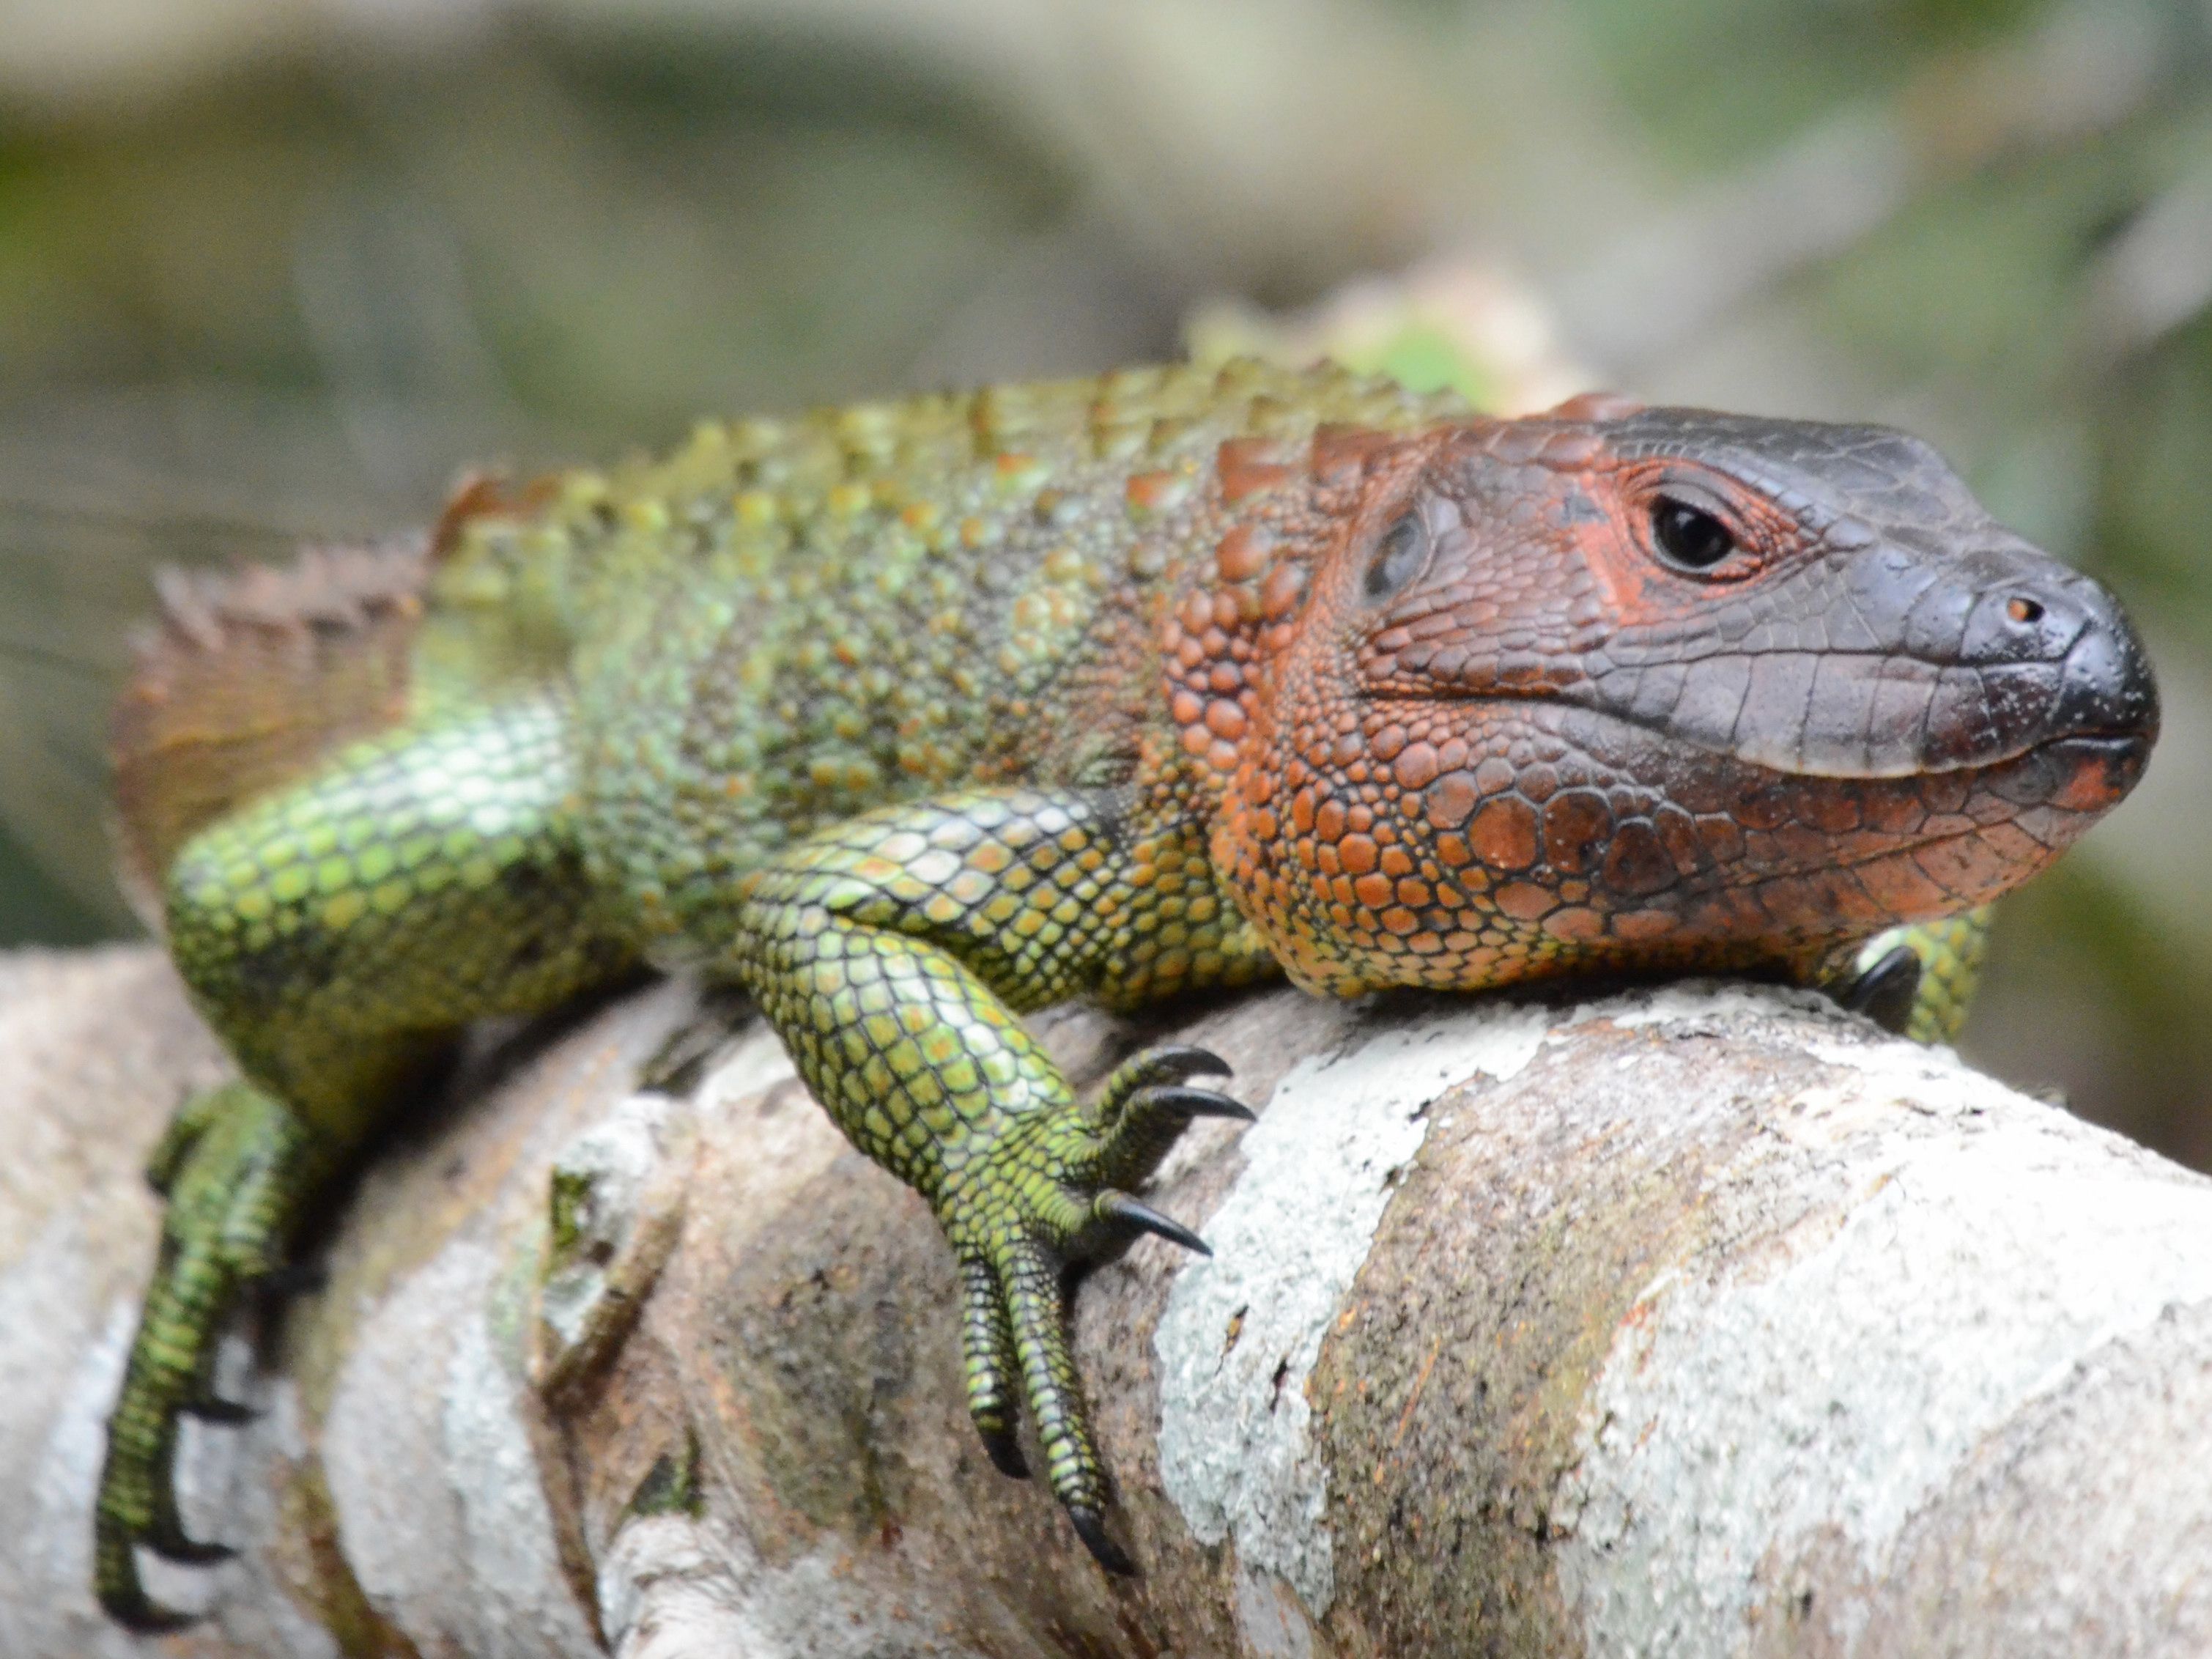 Click picture to see more Green Caiman Lizards.